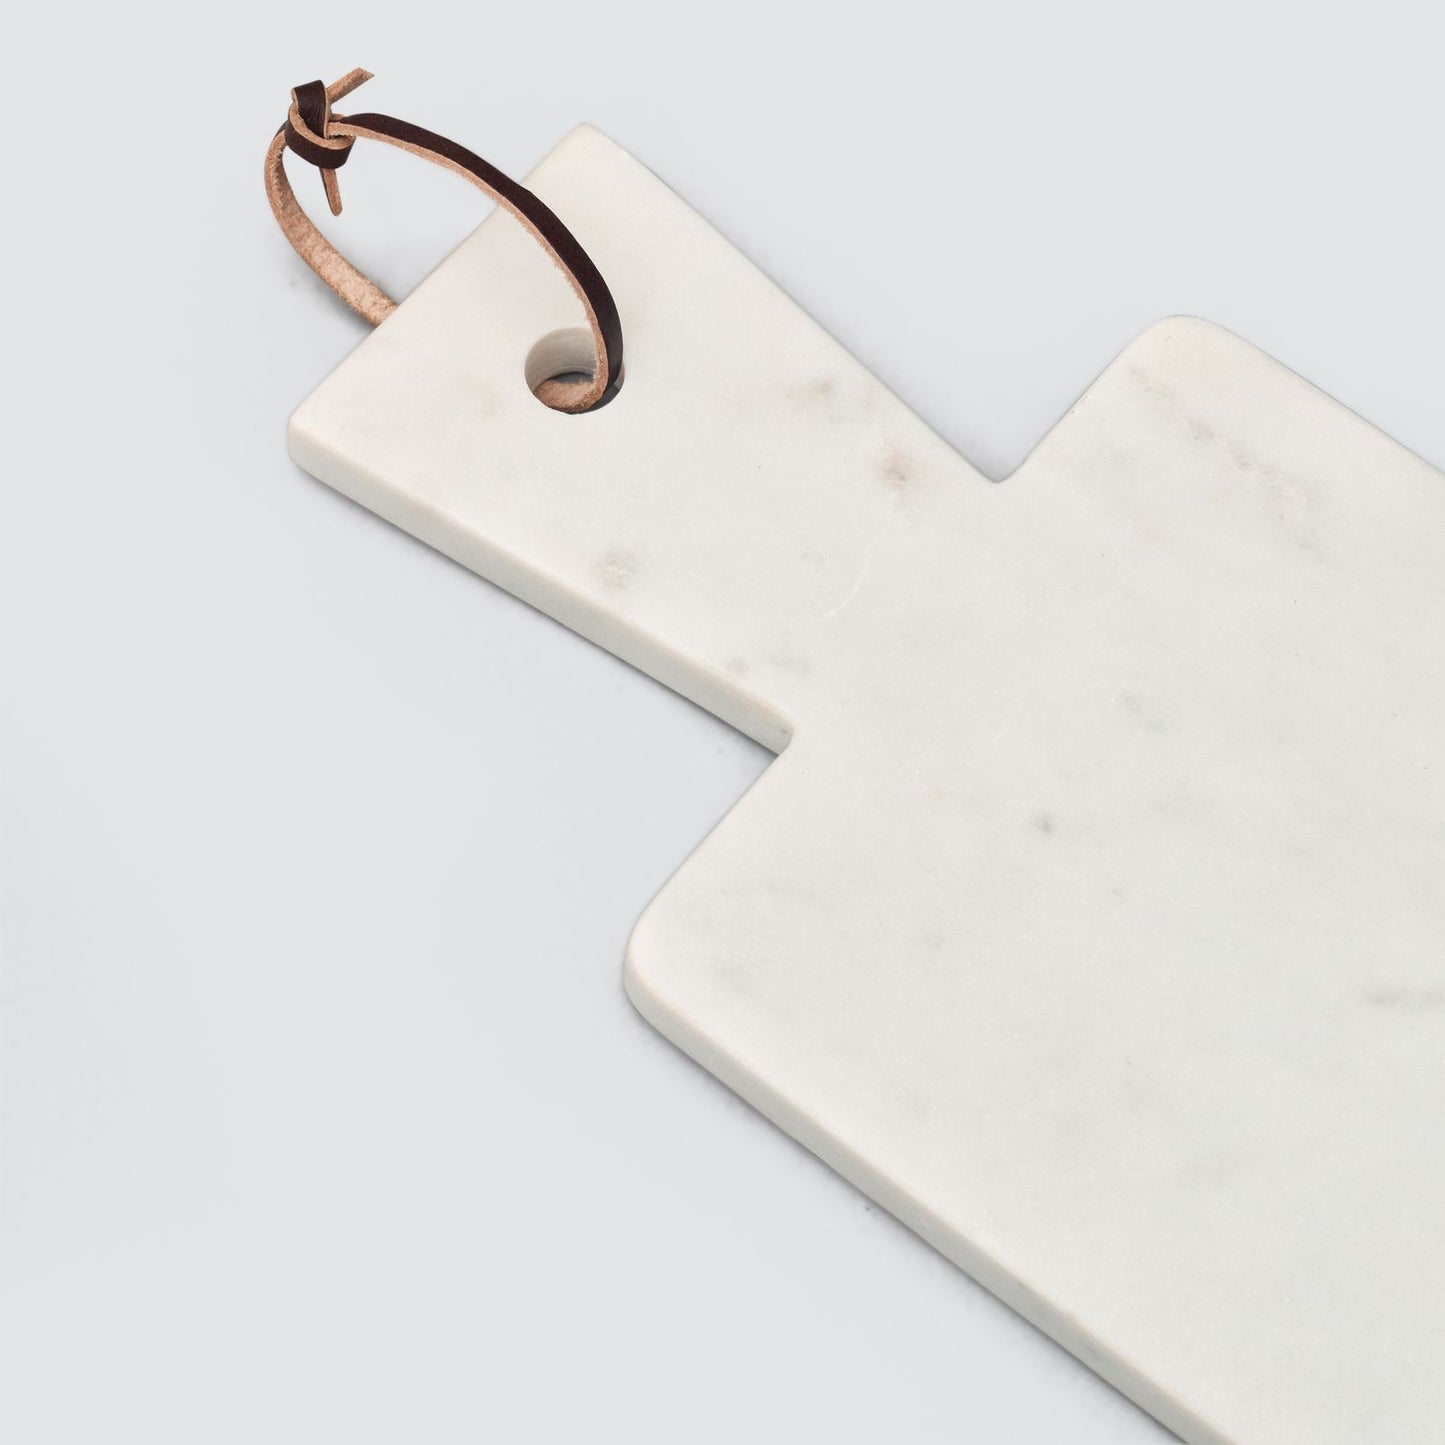 Two-Tone Marble Cutting Board with Leather Handle, White and Black